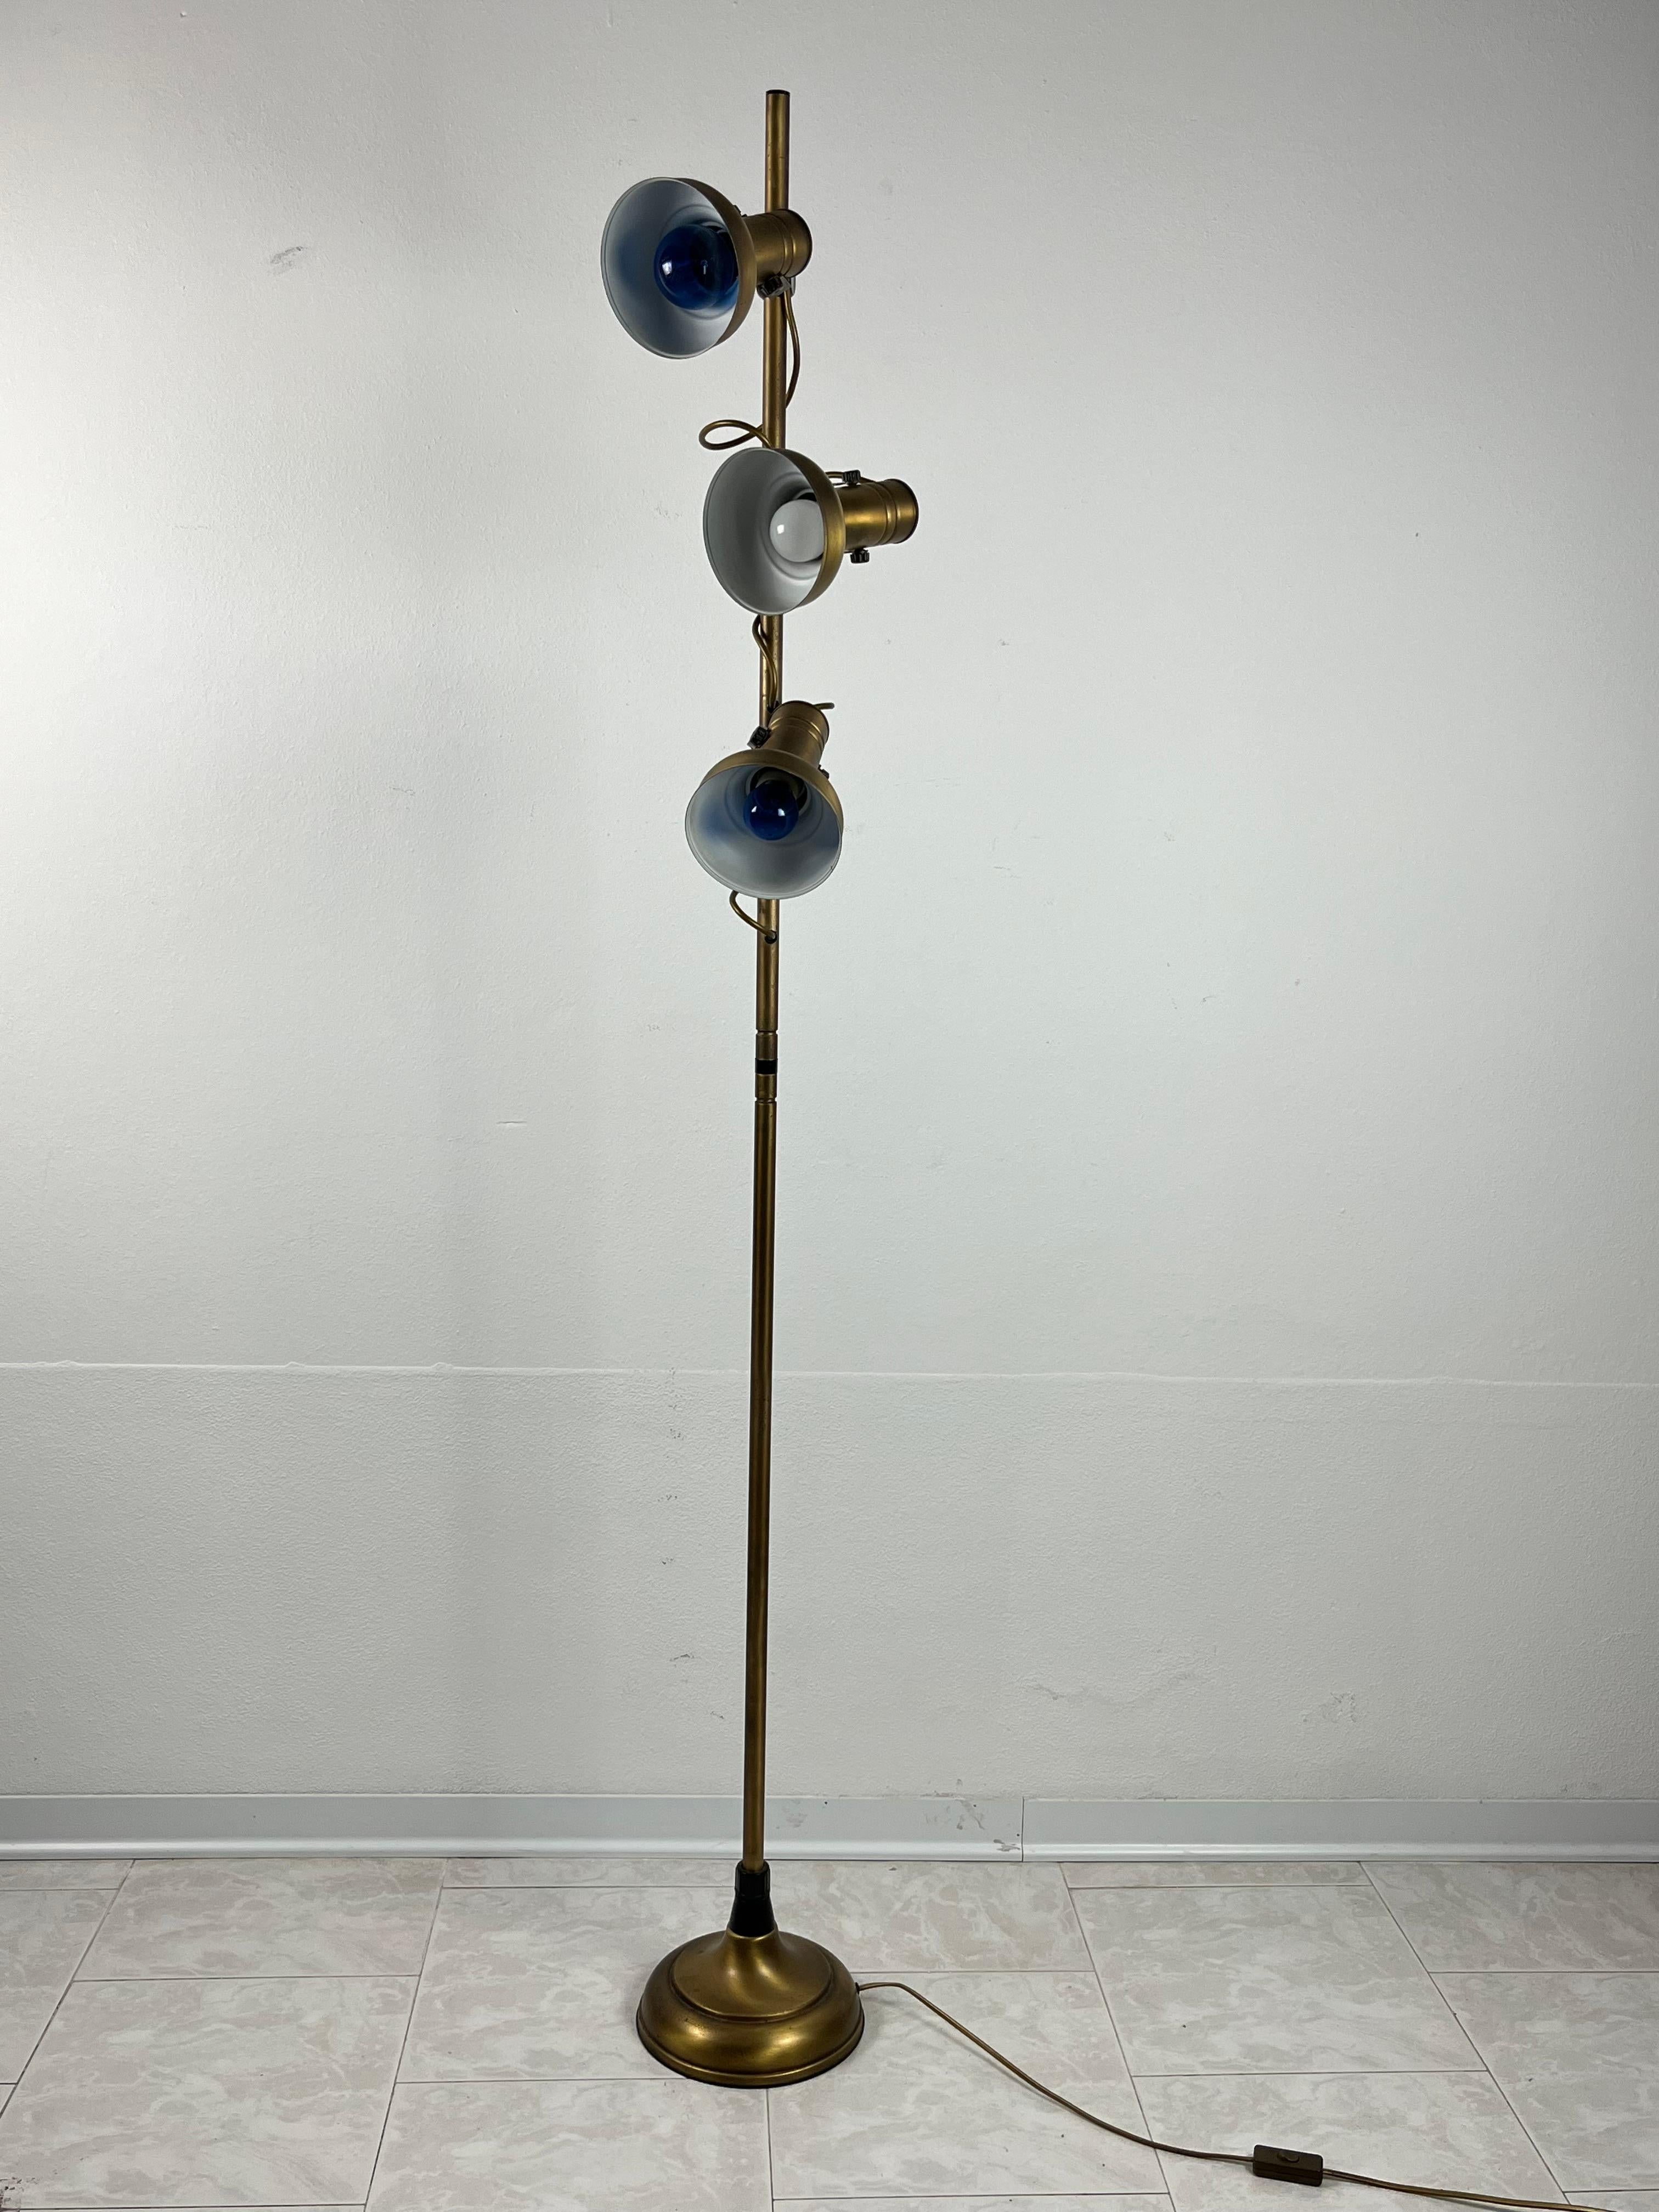 Vintage Italian brass and aluminum floor lamp, 1970s
Found in a lawyer's office. Intact and functional, small signs of ageing.